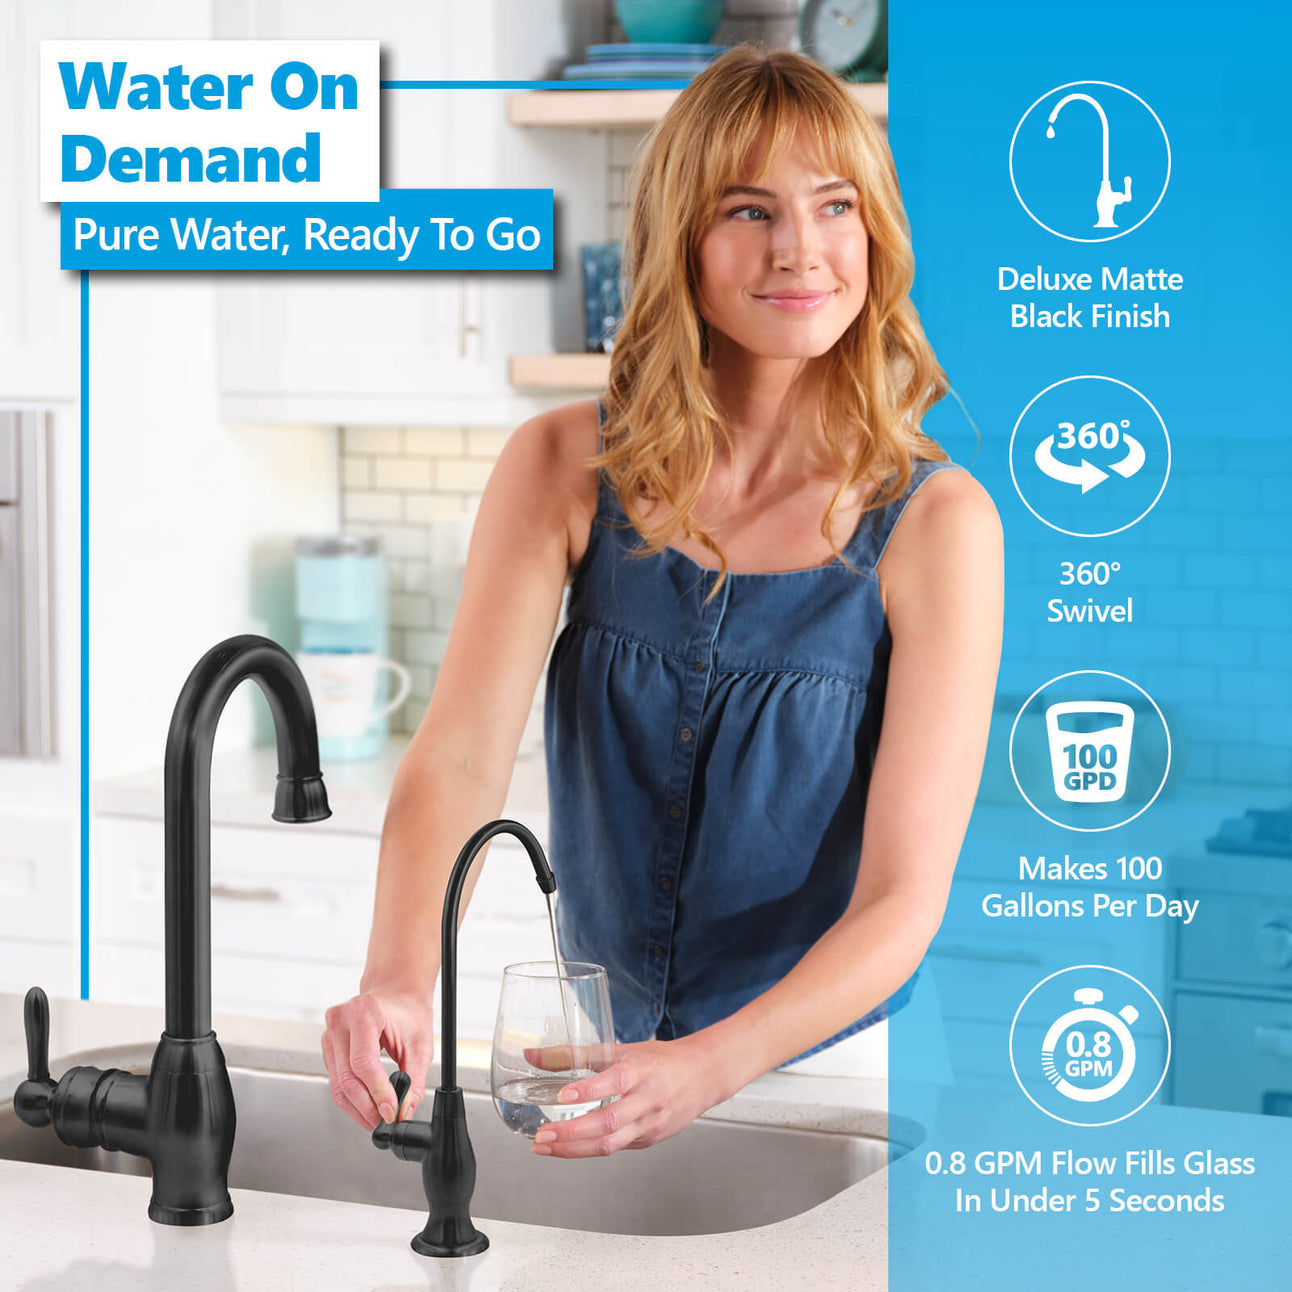 Alkaline & Ultraviolet RO System with deluxe matte black faucet